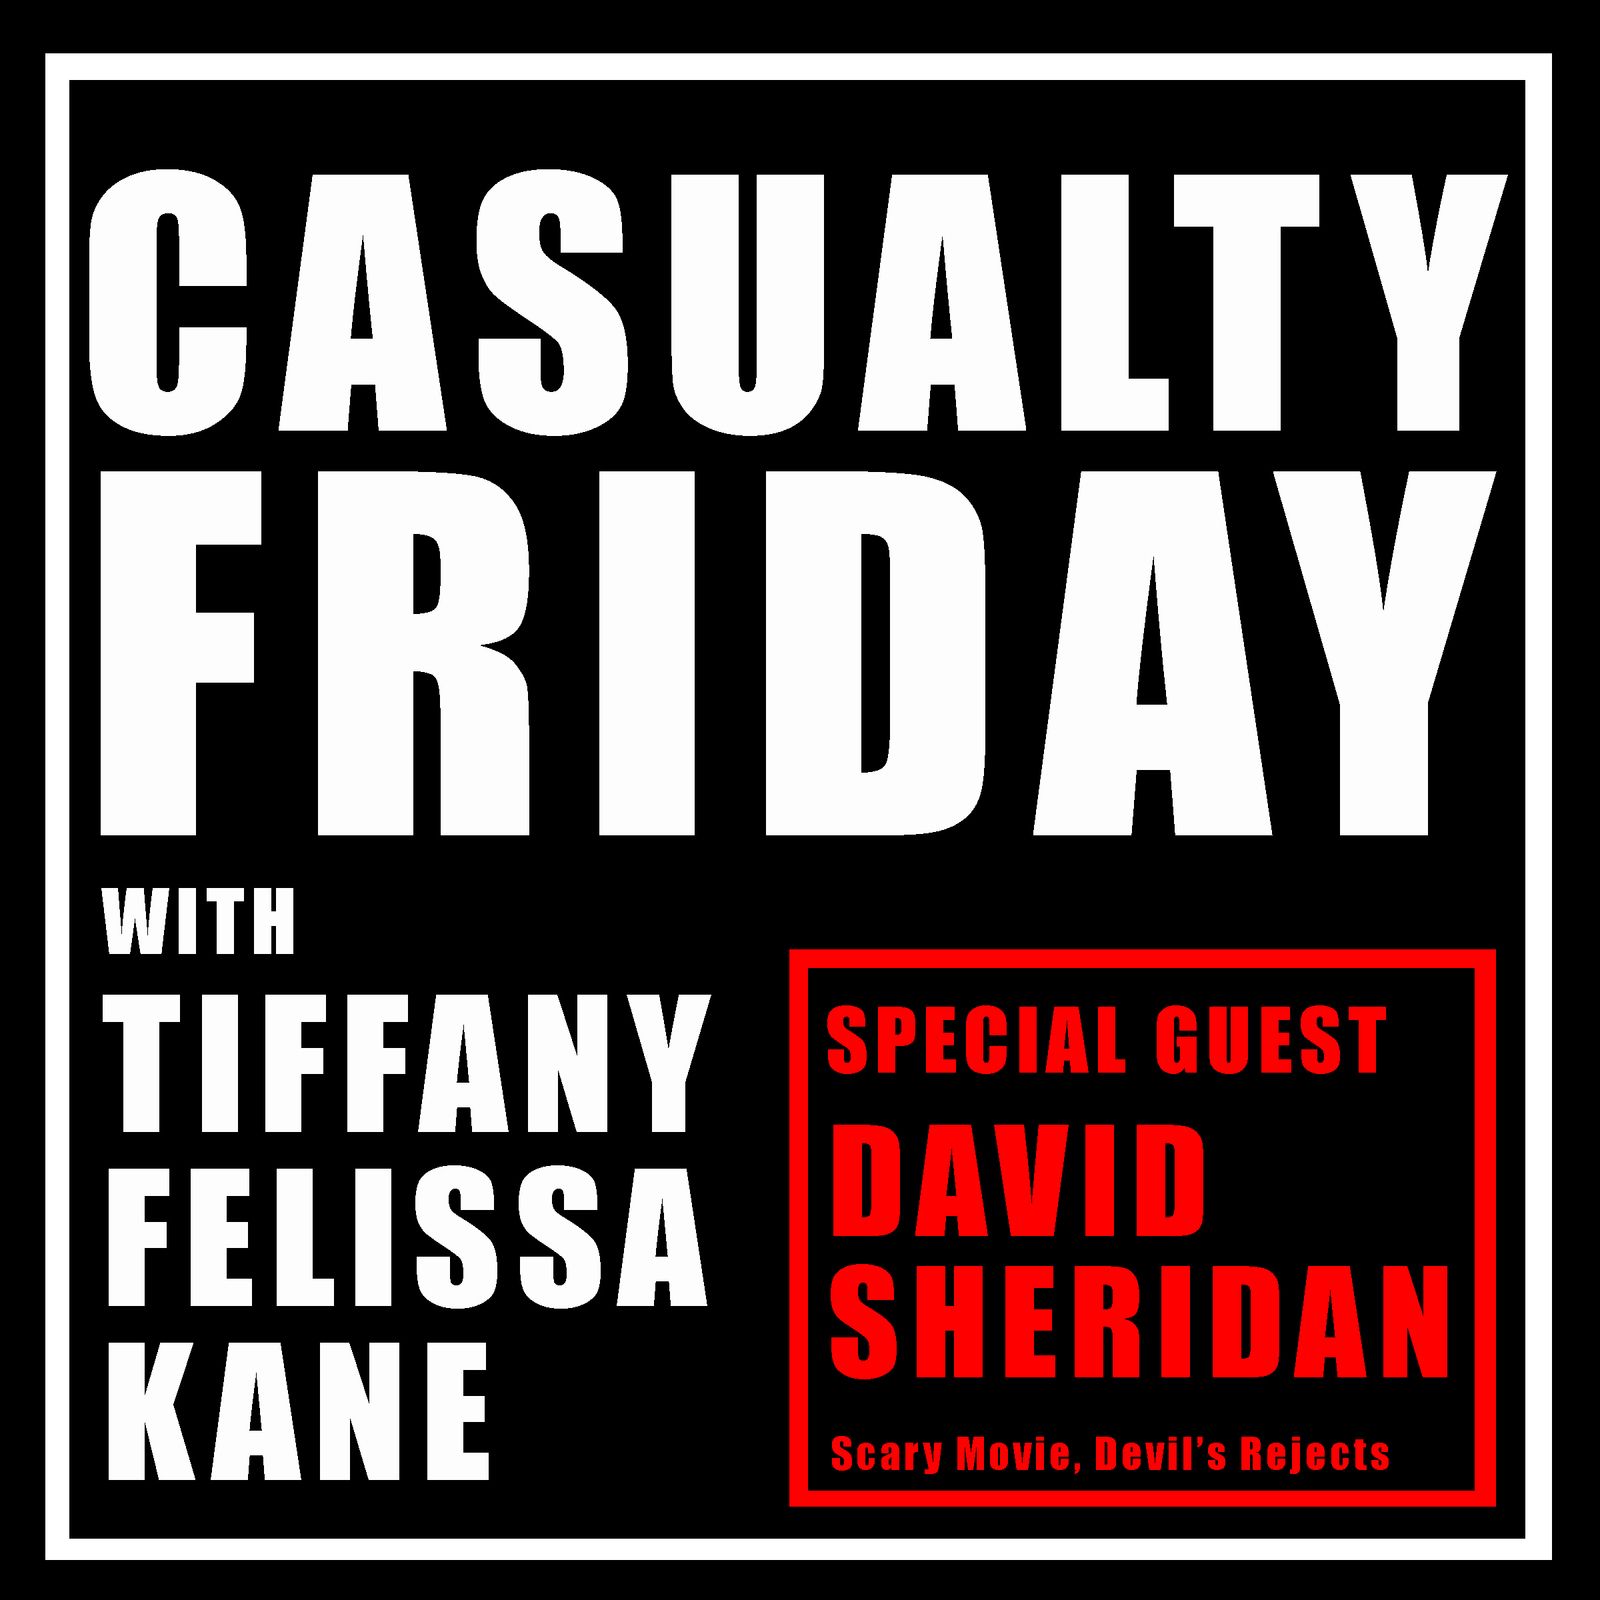 S3 Ep7: Casualty Friday with special guest David Sheridan